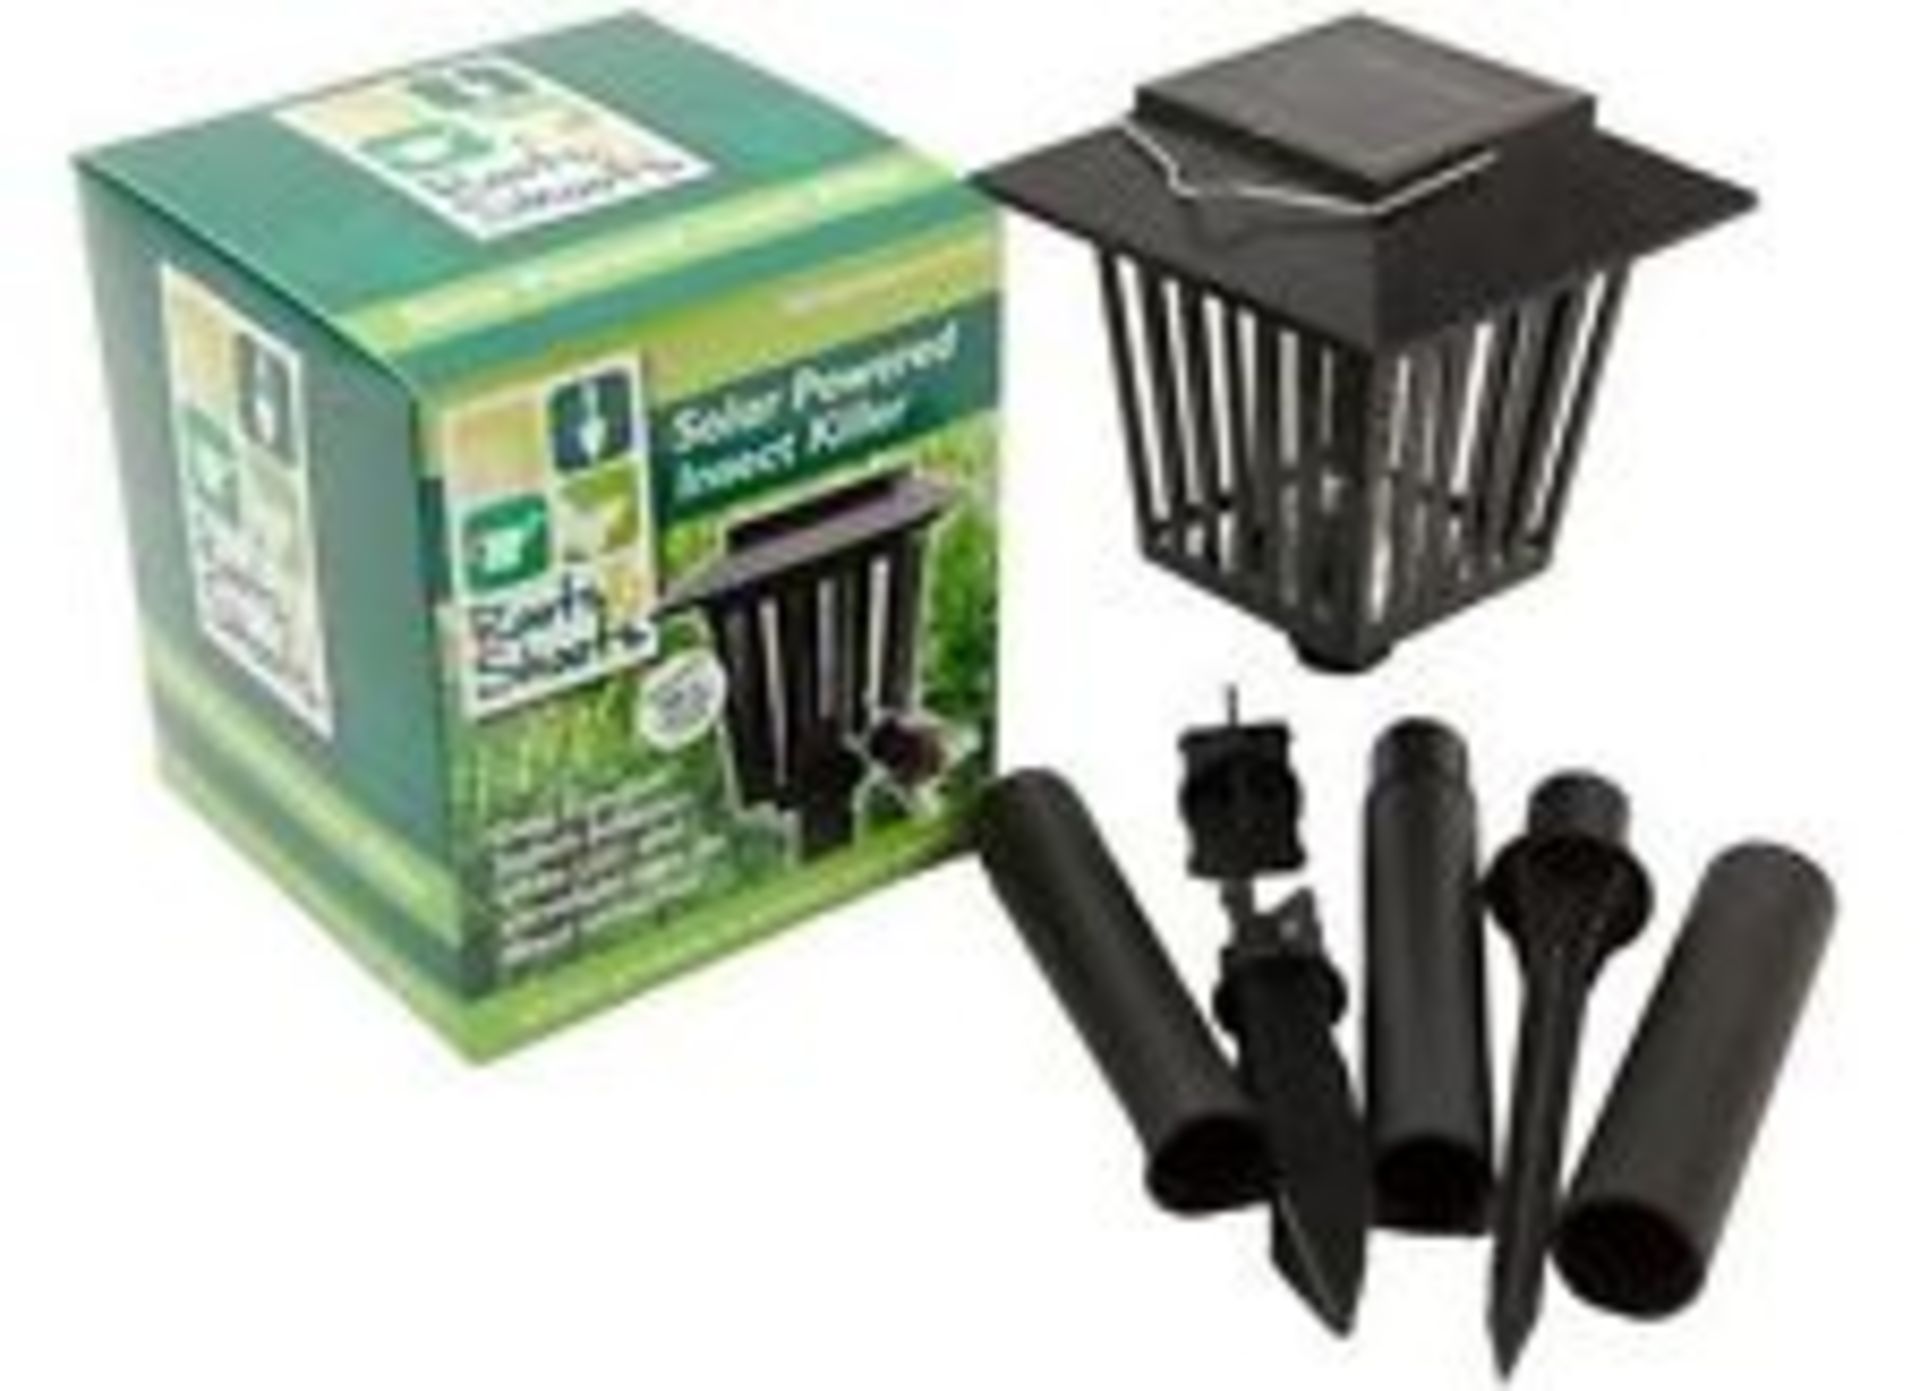 V *TRADE QTY* Brand New Six Inch Diameter Solar Powered Lantern Insect Killer X 10 YOUR BID PRICE TO